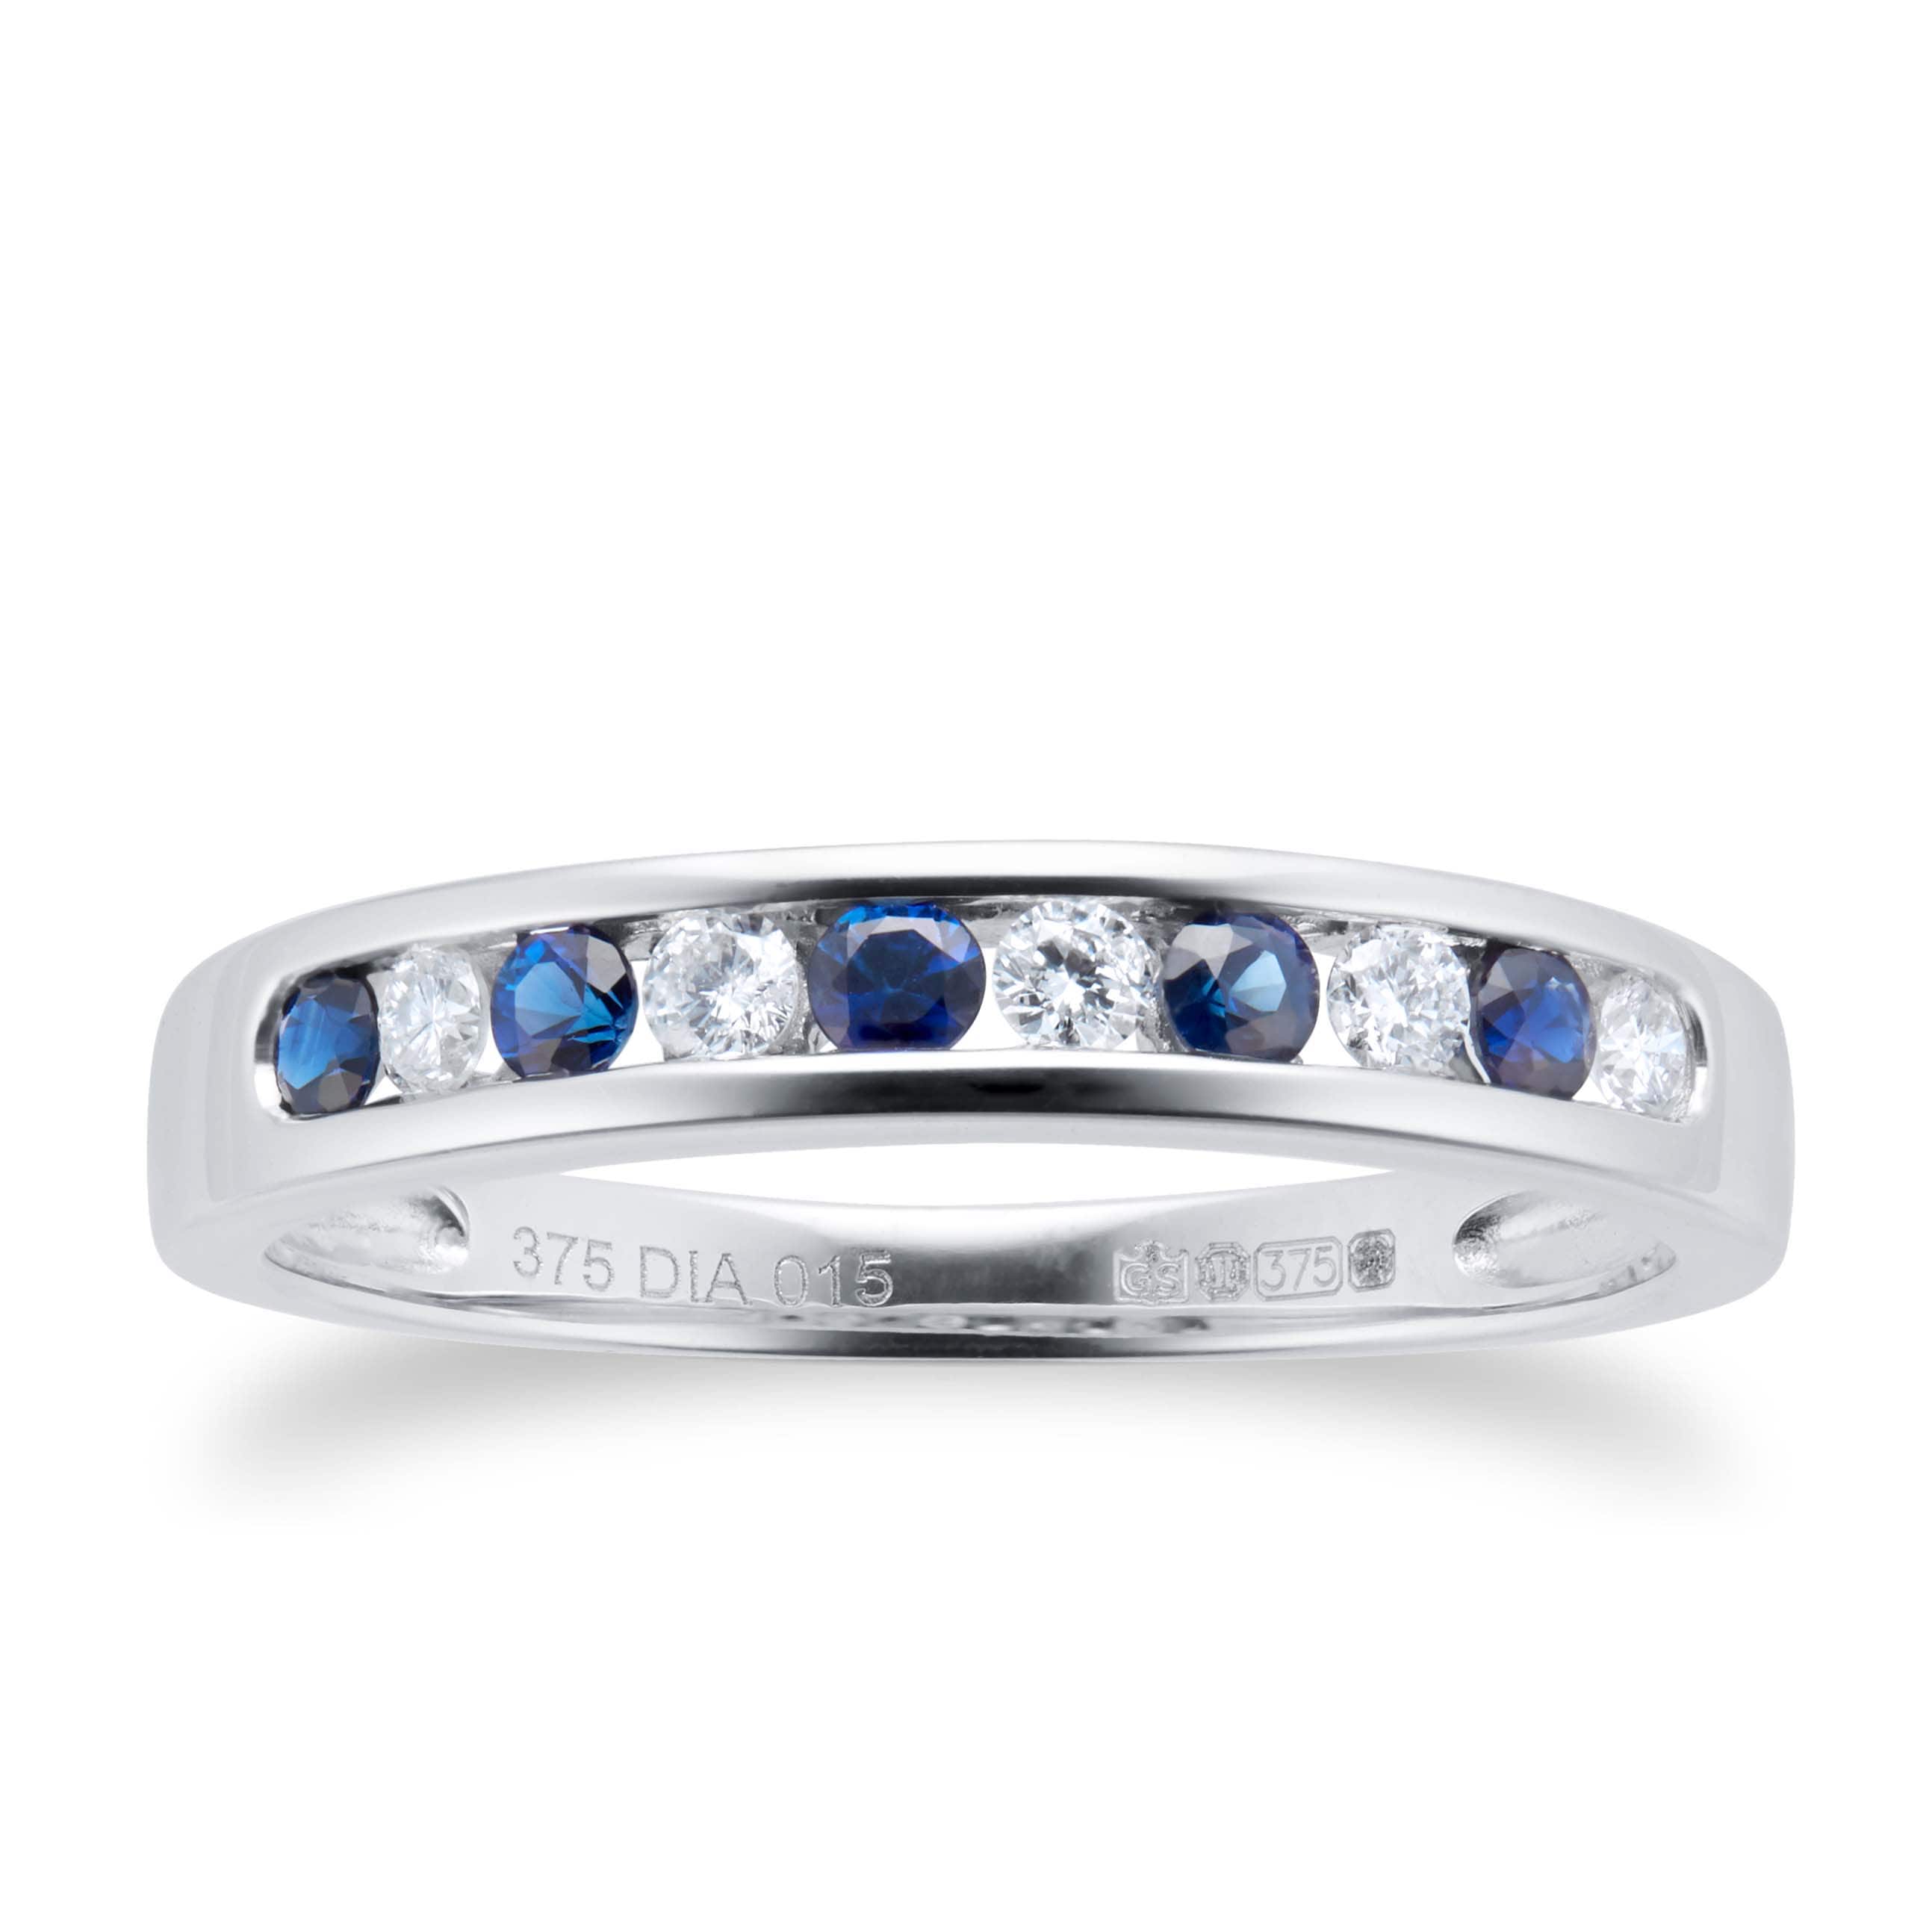 Brilliant Cut Sapphire And Diamond Eternity Ring In 9 Carat White Gold - Ring Size L